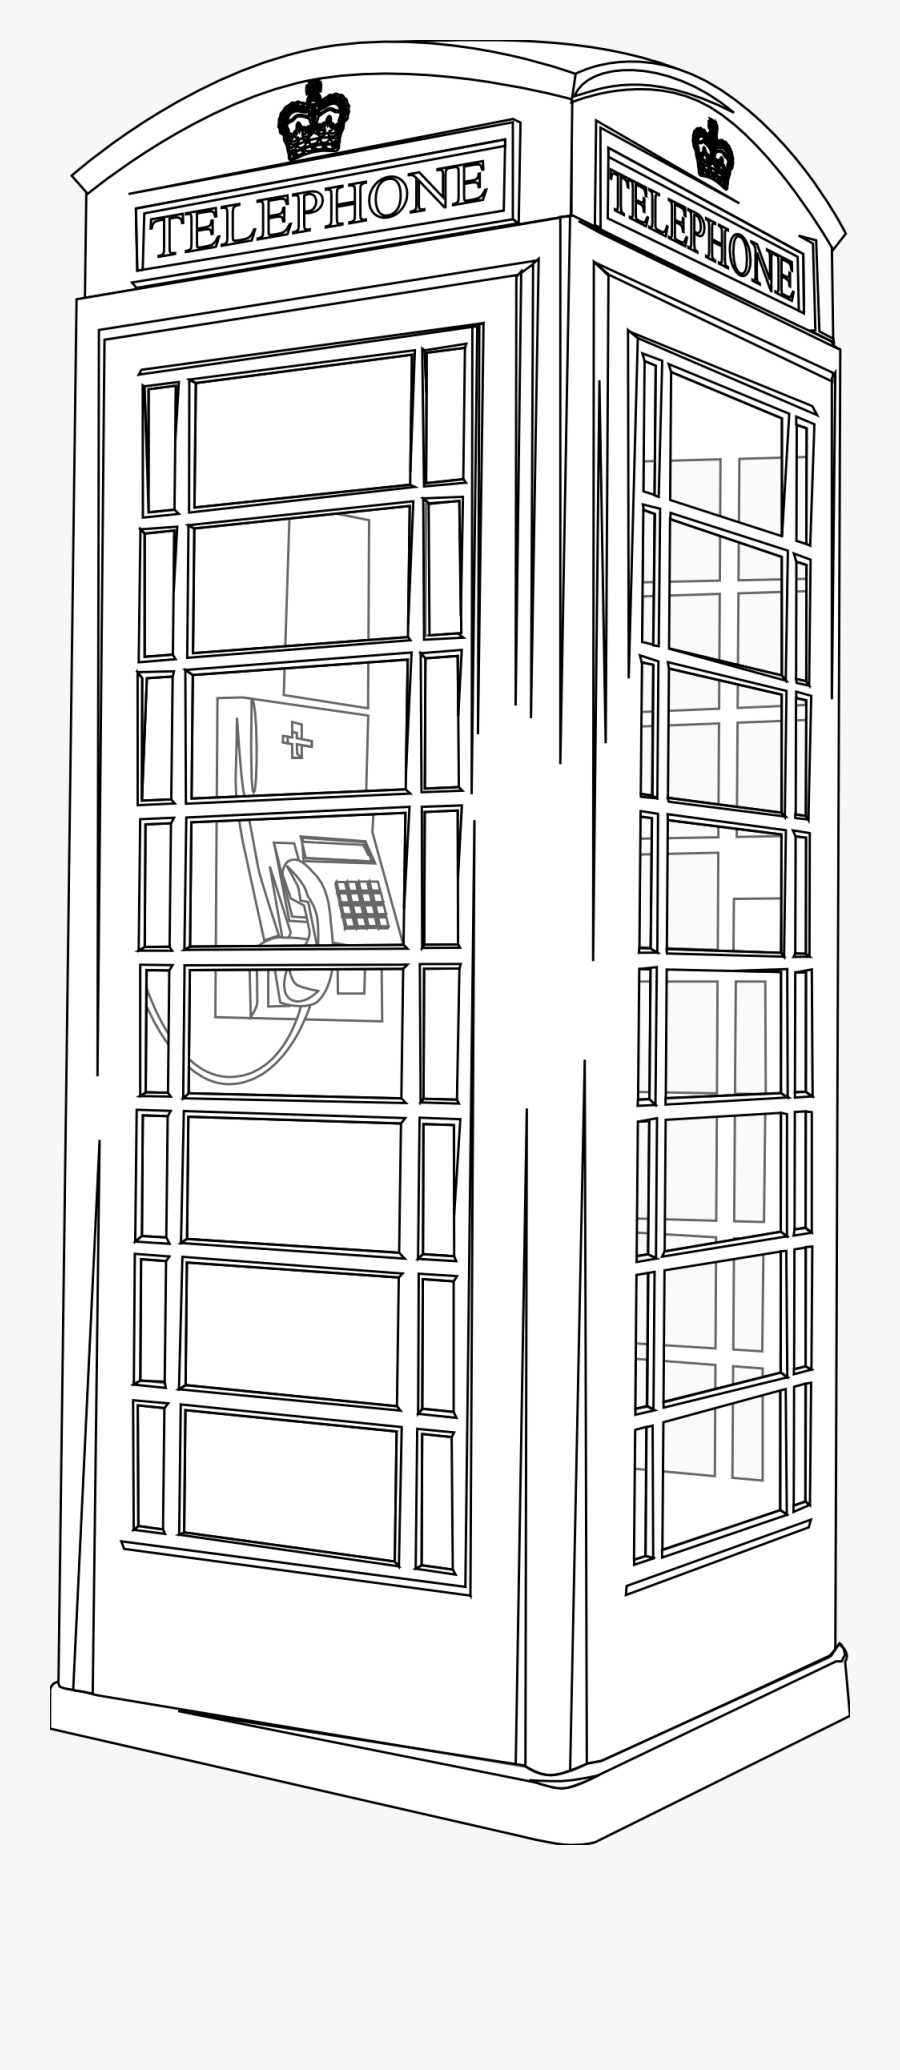 Telephone Box Clipart Black And White, Transparent Clipart